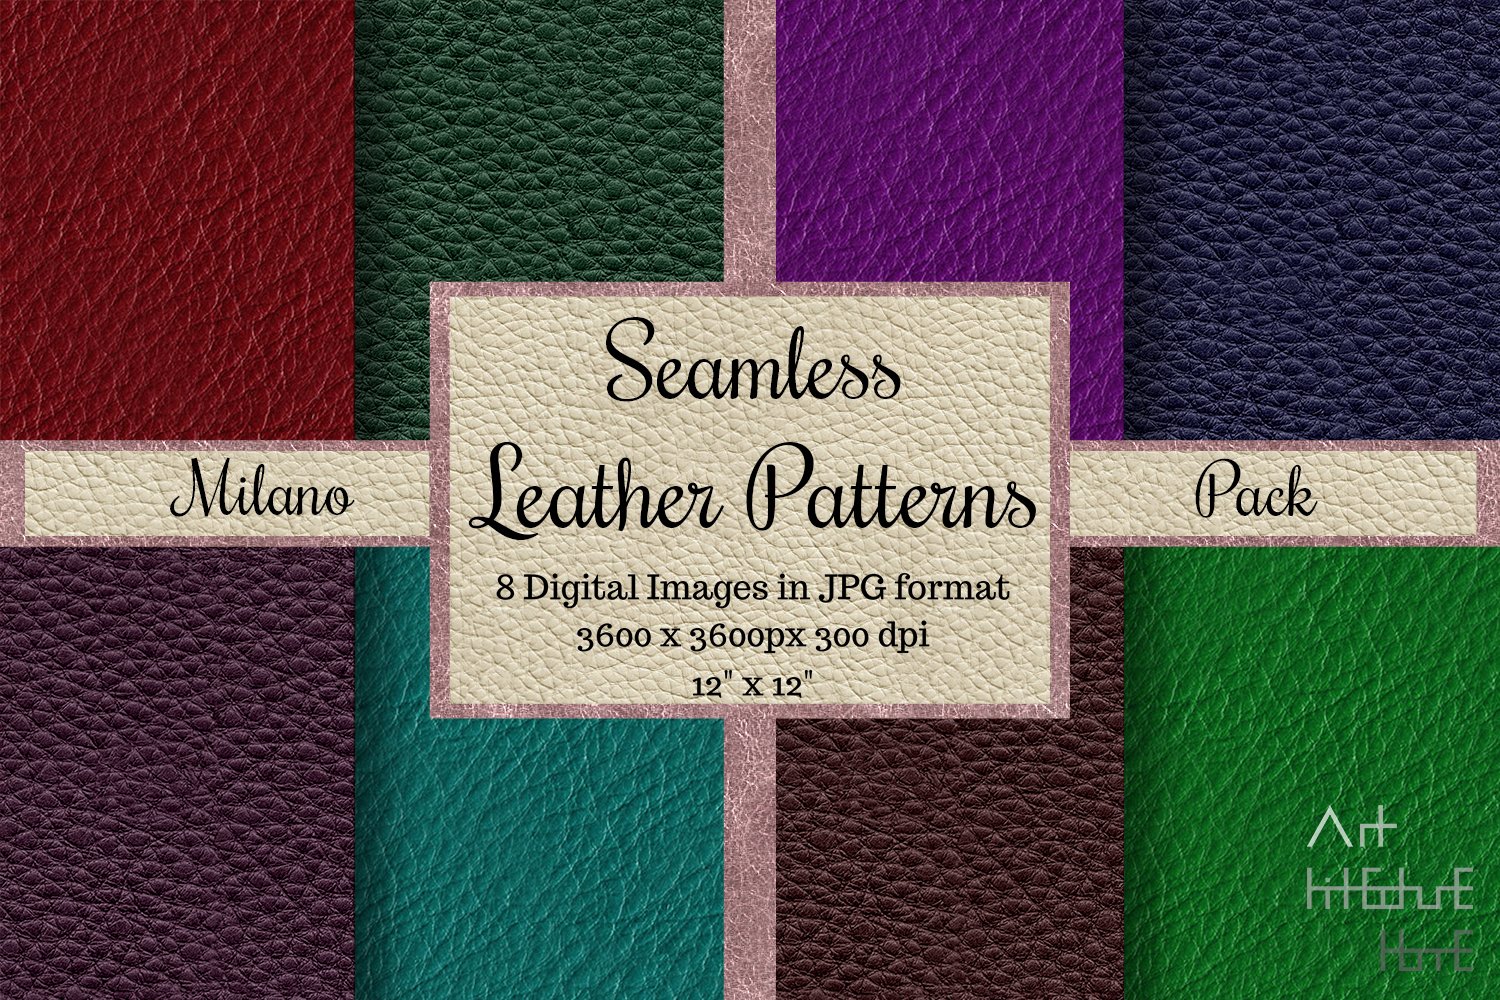 Seamless Leather Patterns - Milano cover image.